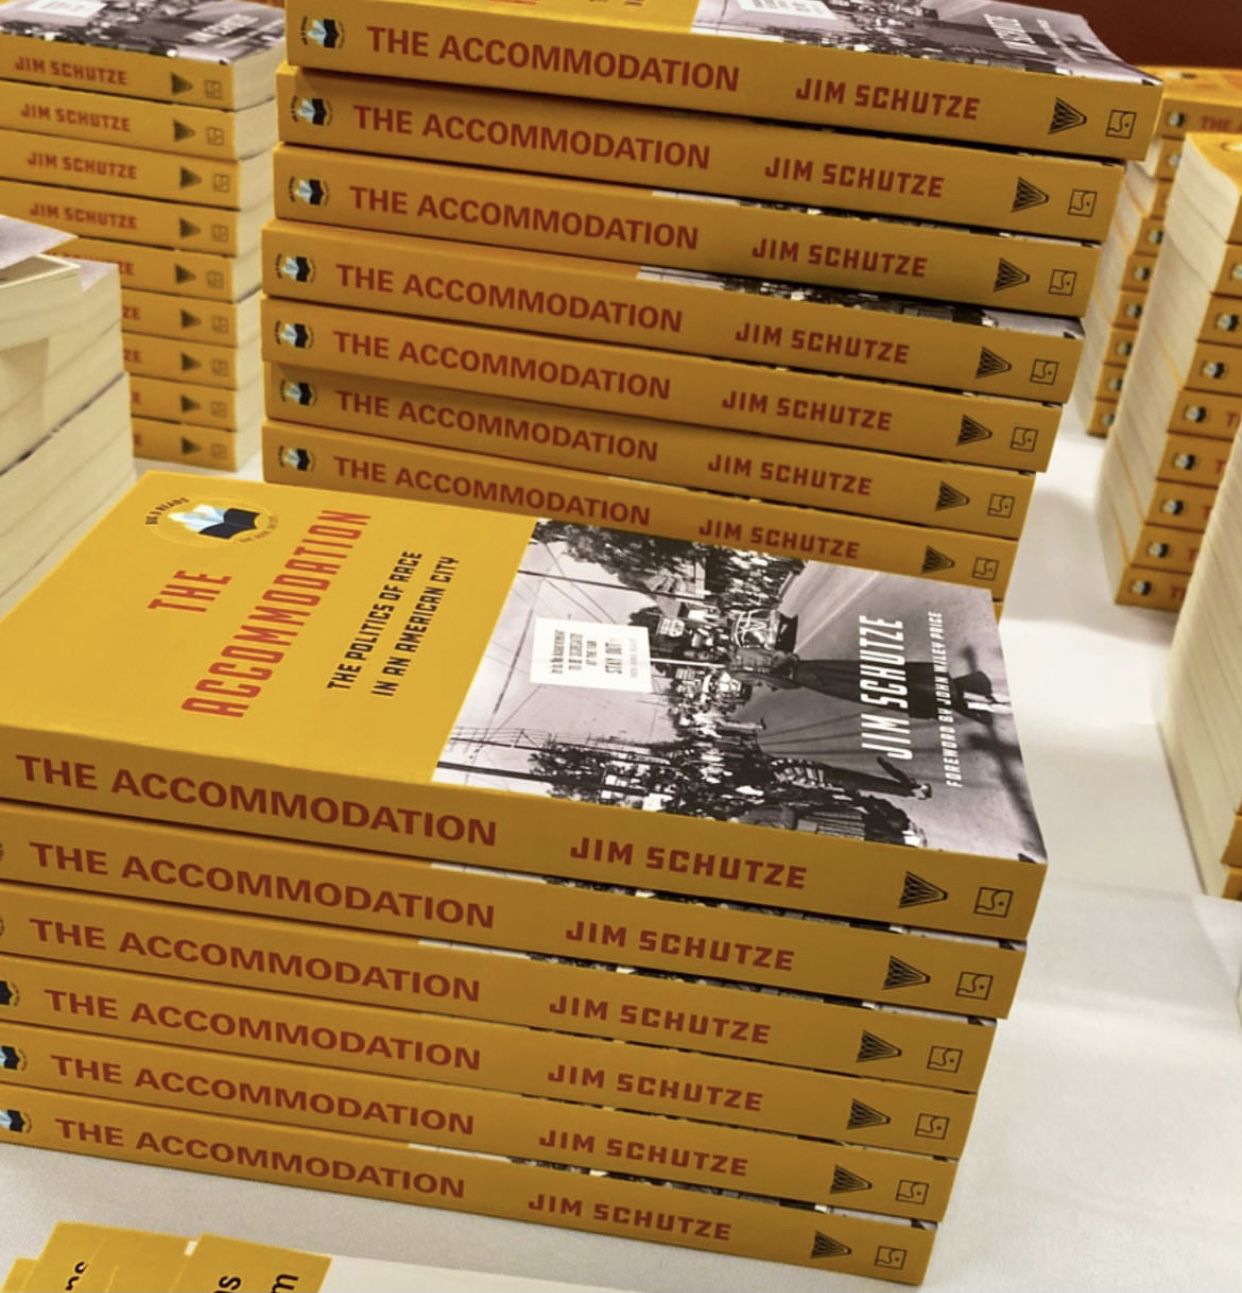 After being out of print since 1987, "The Accommodation" by Jim Schutze was reissued by...